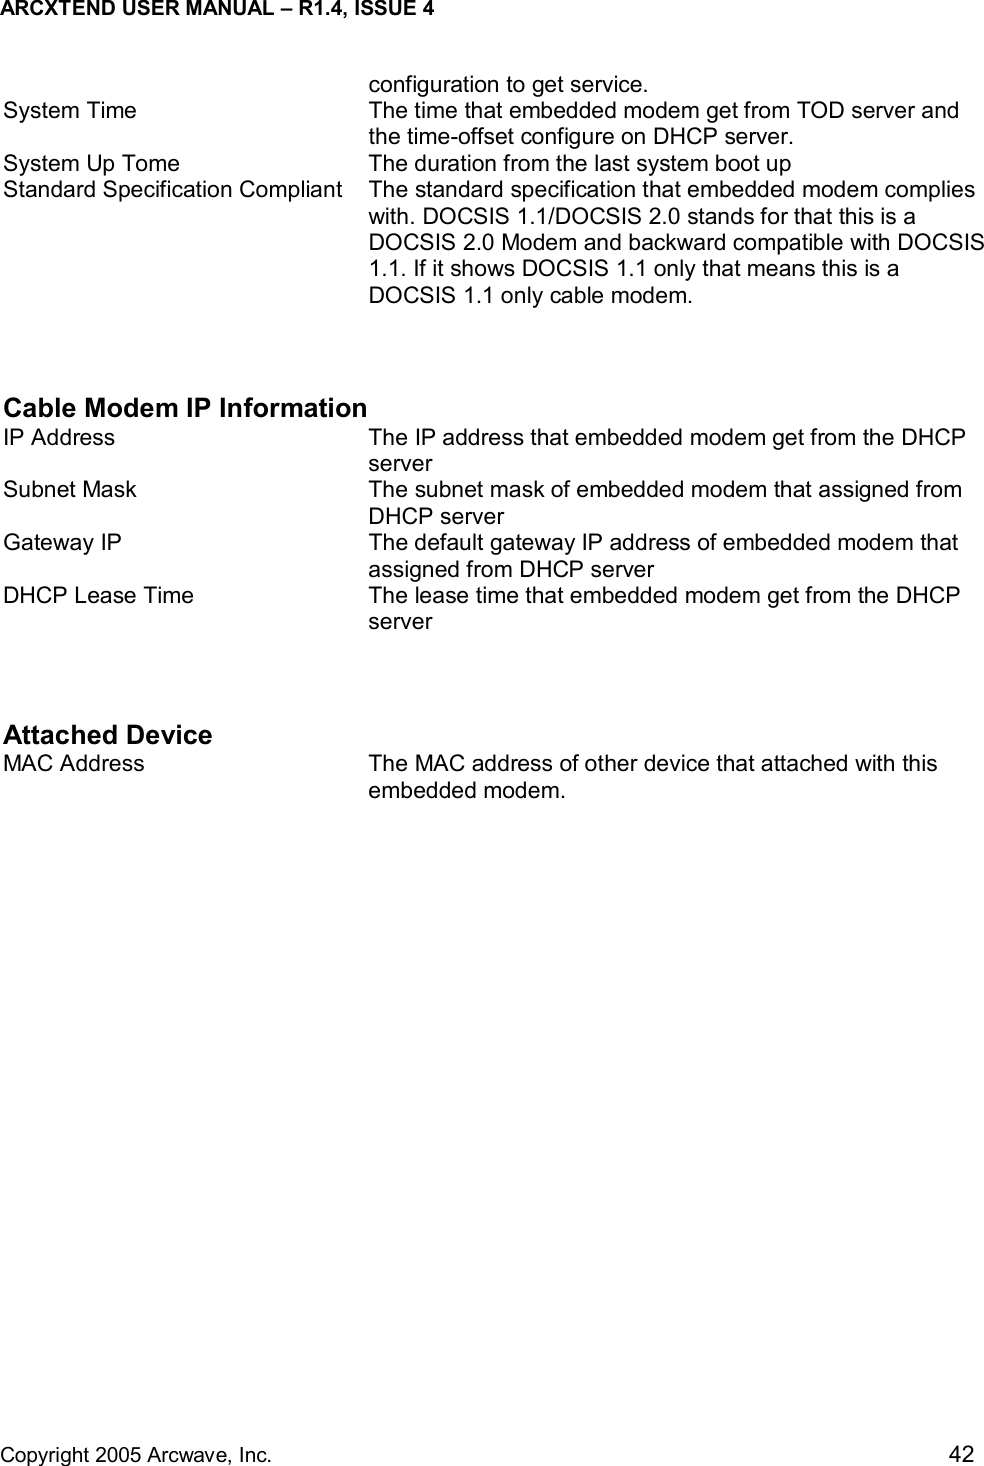 ARCXTEND USER MANUAL – R1.4, ISSUE 4  Copyright 2005 Arcwave, Inc.    42 configuration to get service. System Time  The time that embedded modem get from TOD server and the time-offset configure on DHCP server. System Up Tome  The duration from the last system boot up Standard Specification Compliant  The standard specification that embedded modem complies with. DOCSIS 1.1/DOCSIS 2.0 stands for that this is a DOCSIS 2.0 Modem and backward compatible with DOCSIS 1.1. If it shows DOCSIS 1.1 only that means this is a DOCSIS 1.1 only cable modem.   Cable Modem IP Information  IP Address  The IP address that embedded modem get from the DHCP server Subnet Mask  The subnet mask of embedded modem that assigned from DHCP server Gateway IP  The default gateway IP address of embedded modem that assigned from DHCP server DHCP Lease Time  The lease time that embedded modem get from the DHCP server  Attached Device MAC Address  The MAC address of other device that attached with this embedded modem. 